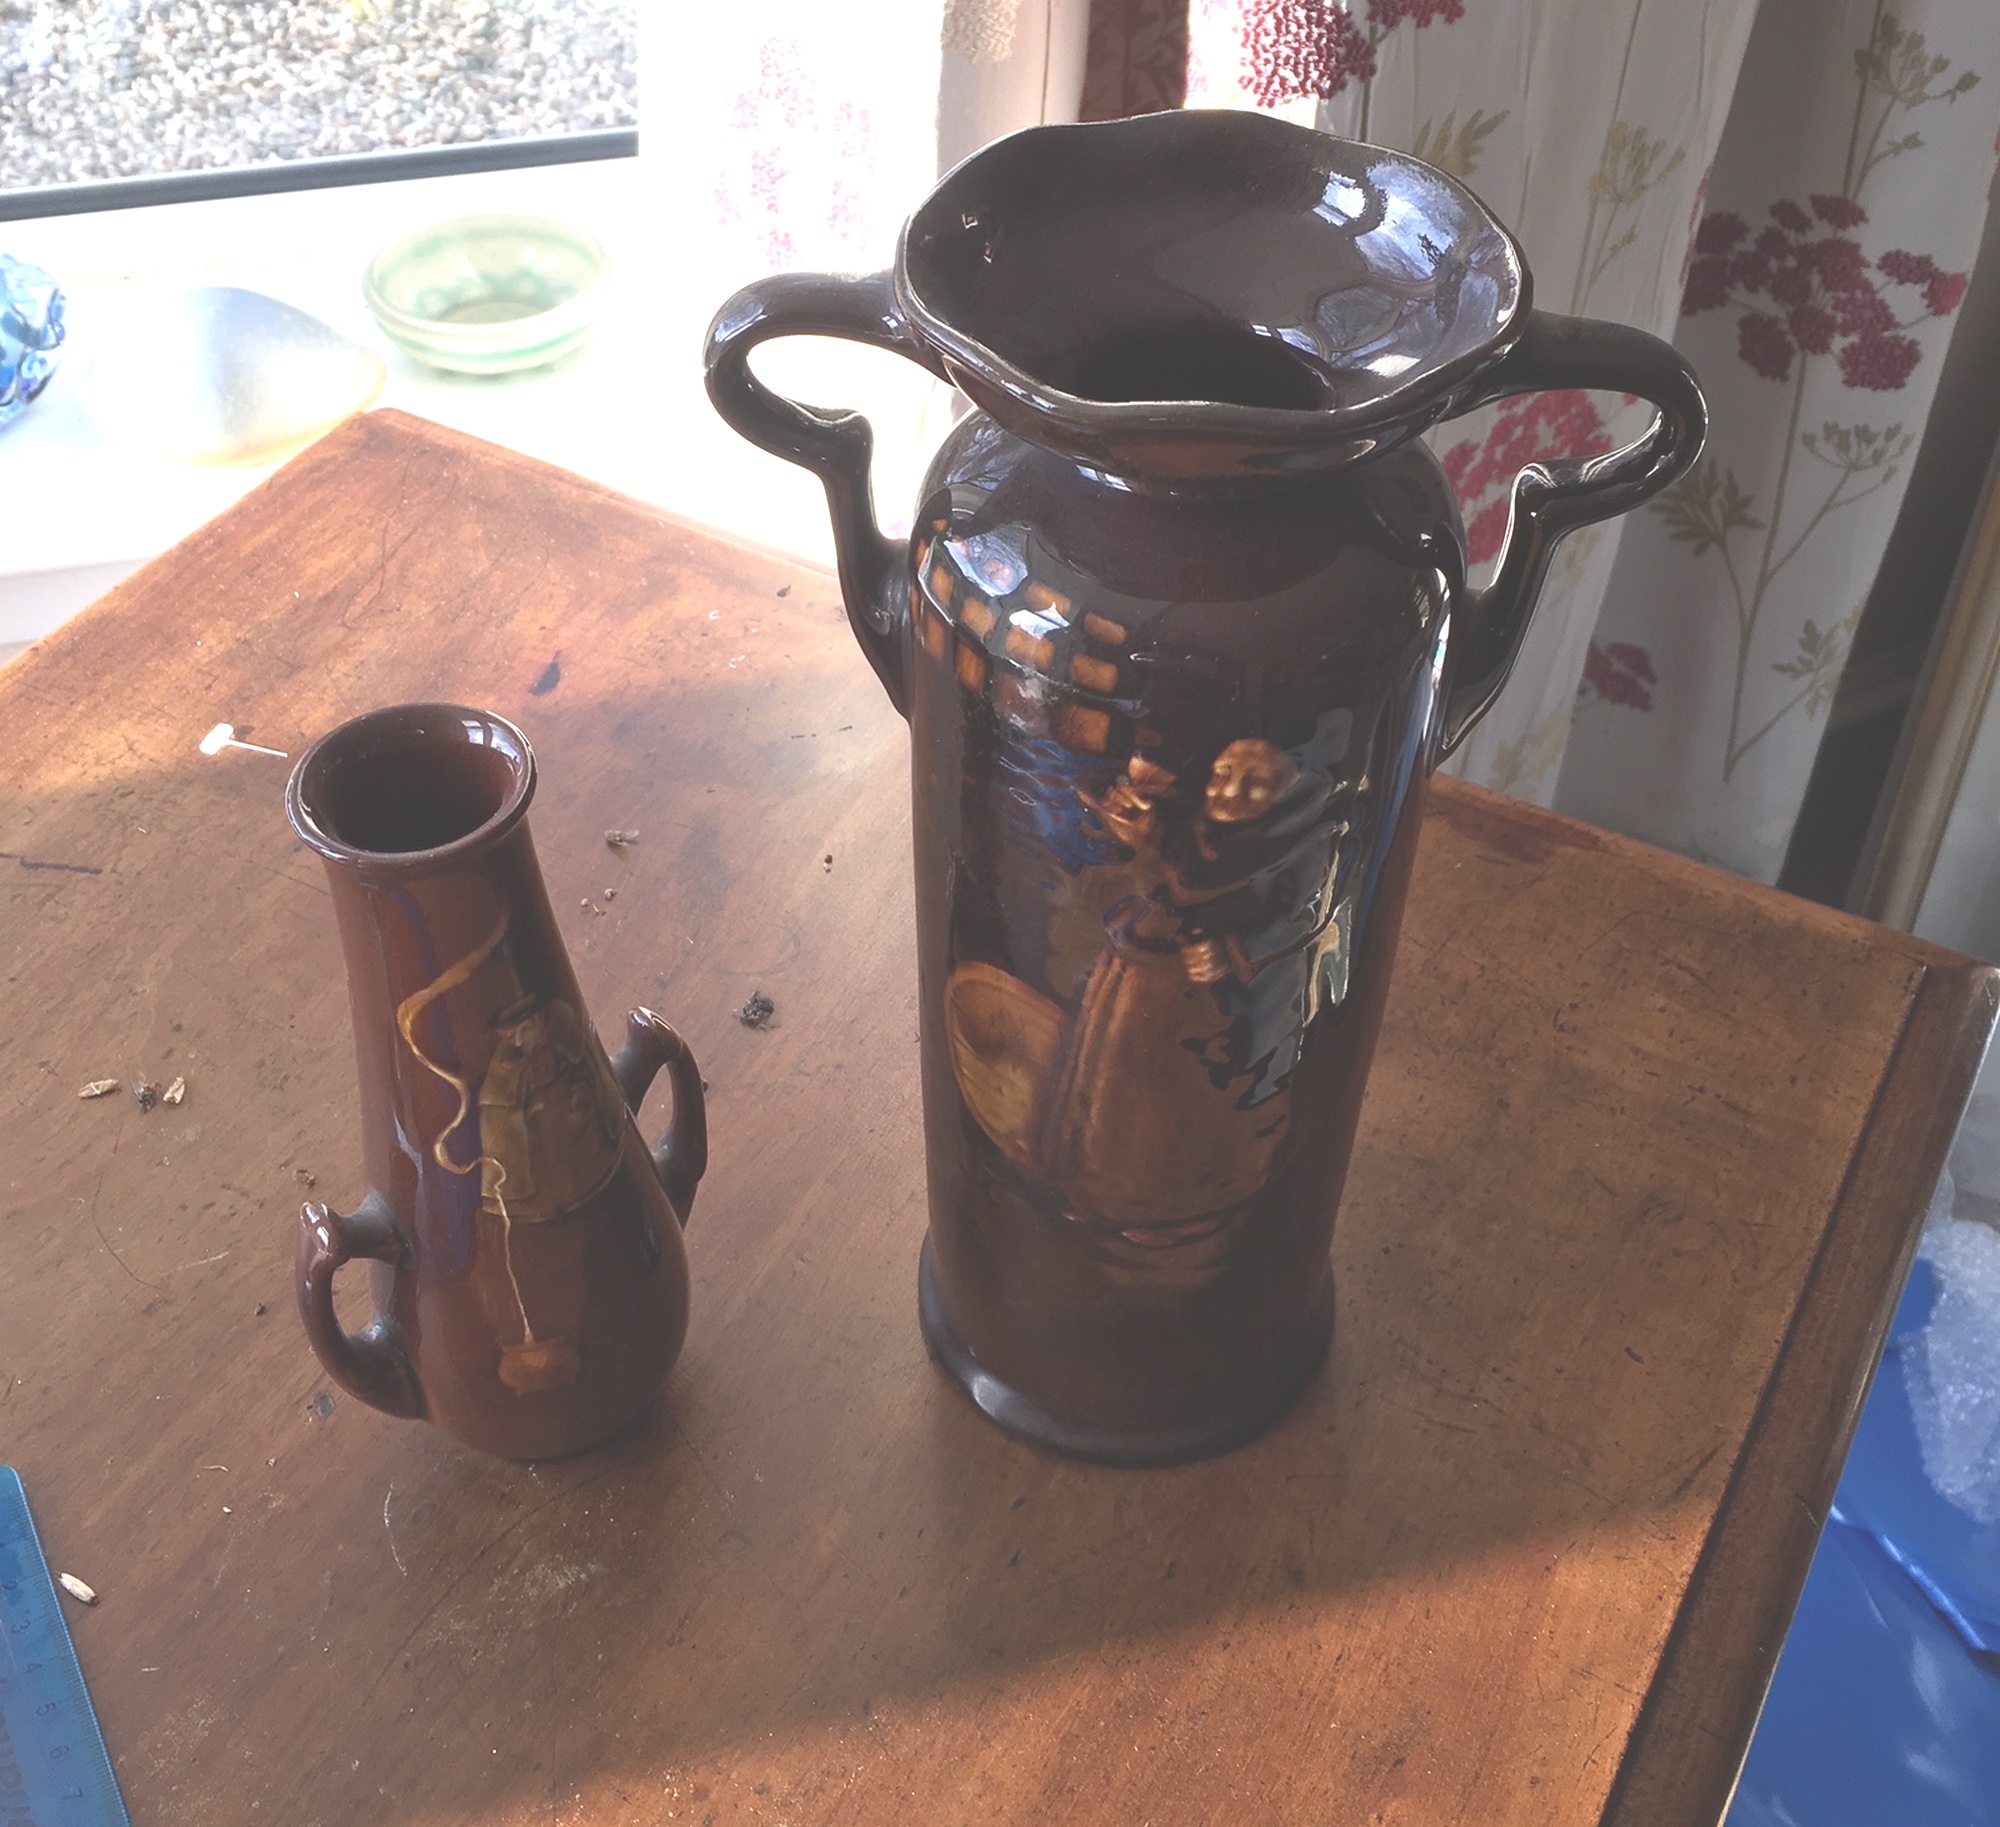 2 x Doulton Vases - 26.5cm and 18cm tall.